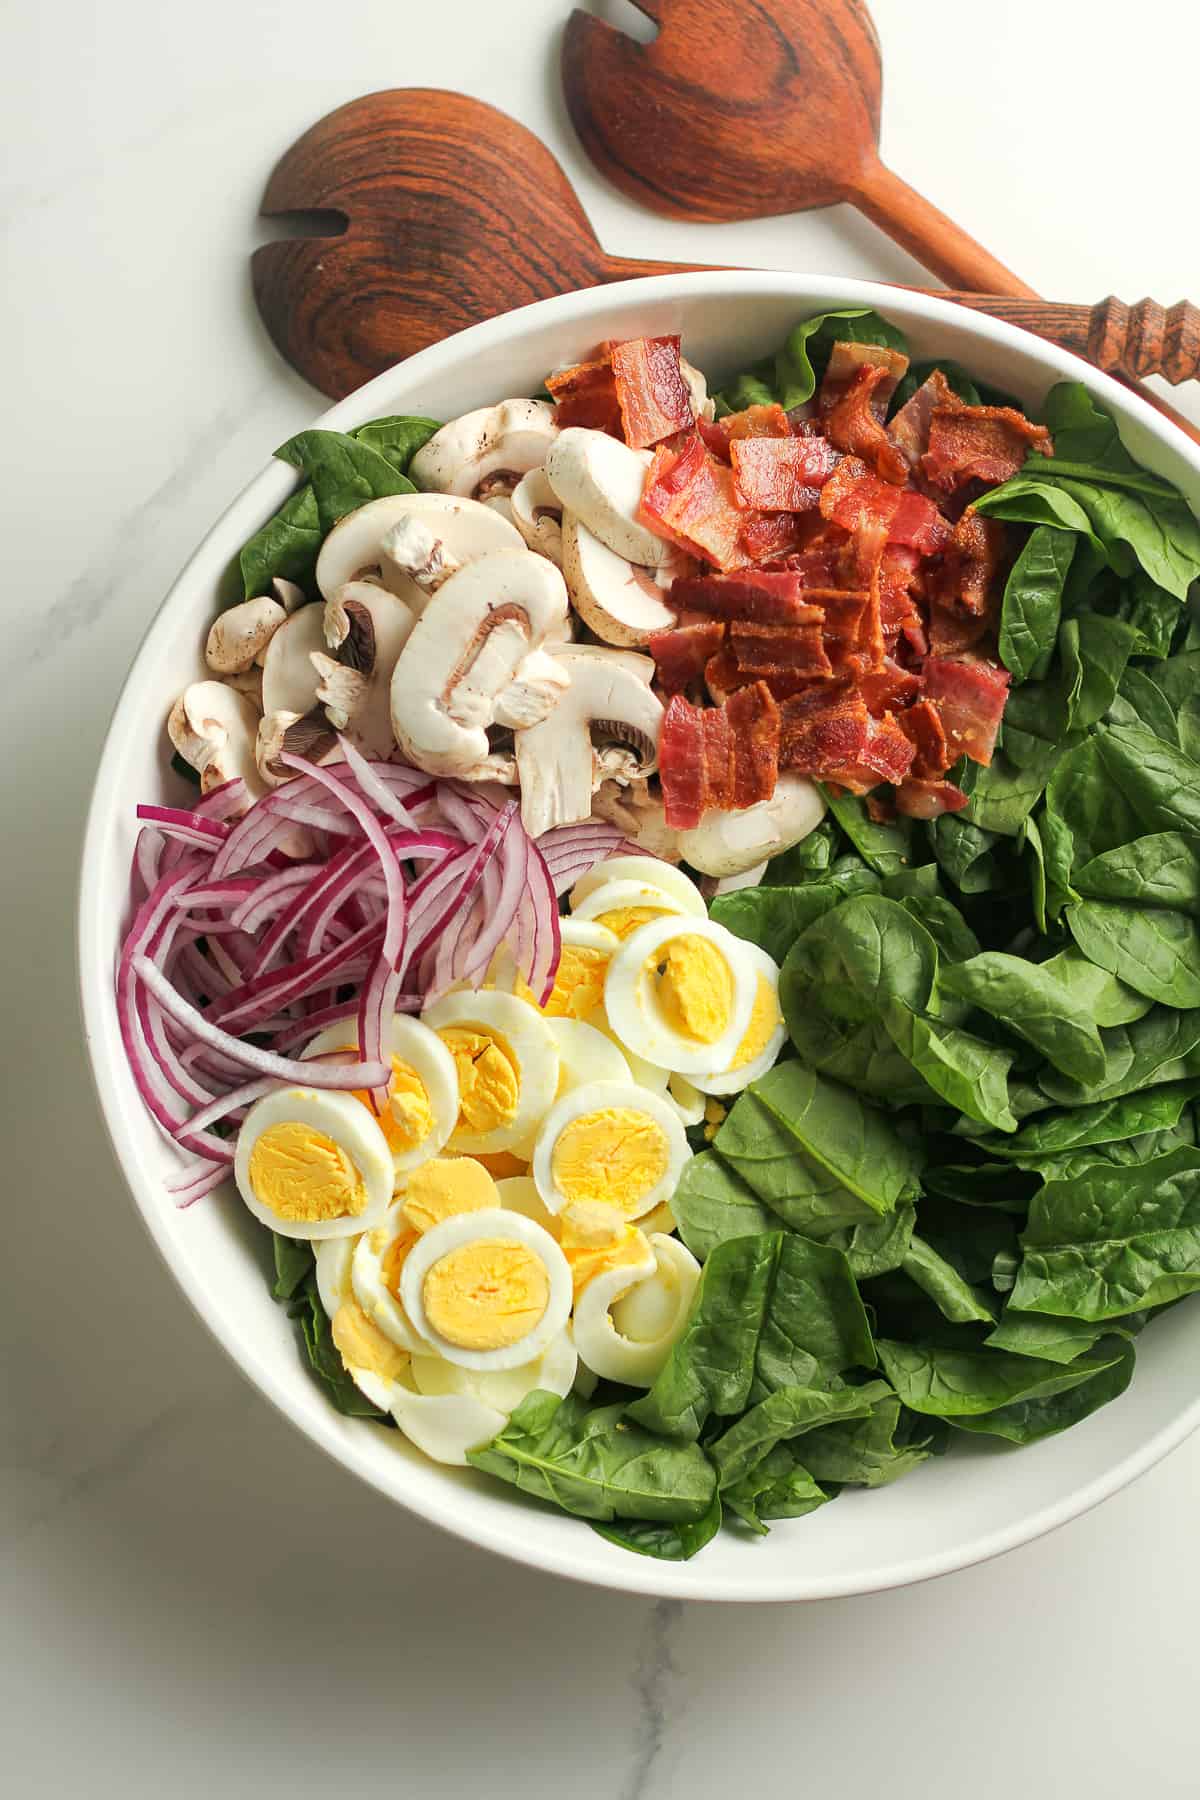 The bowl of the spinach salad, by ingredients.